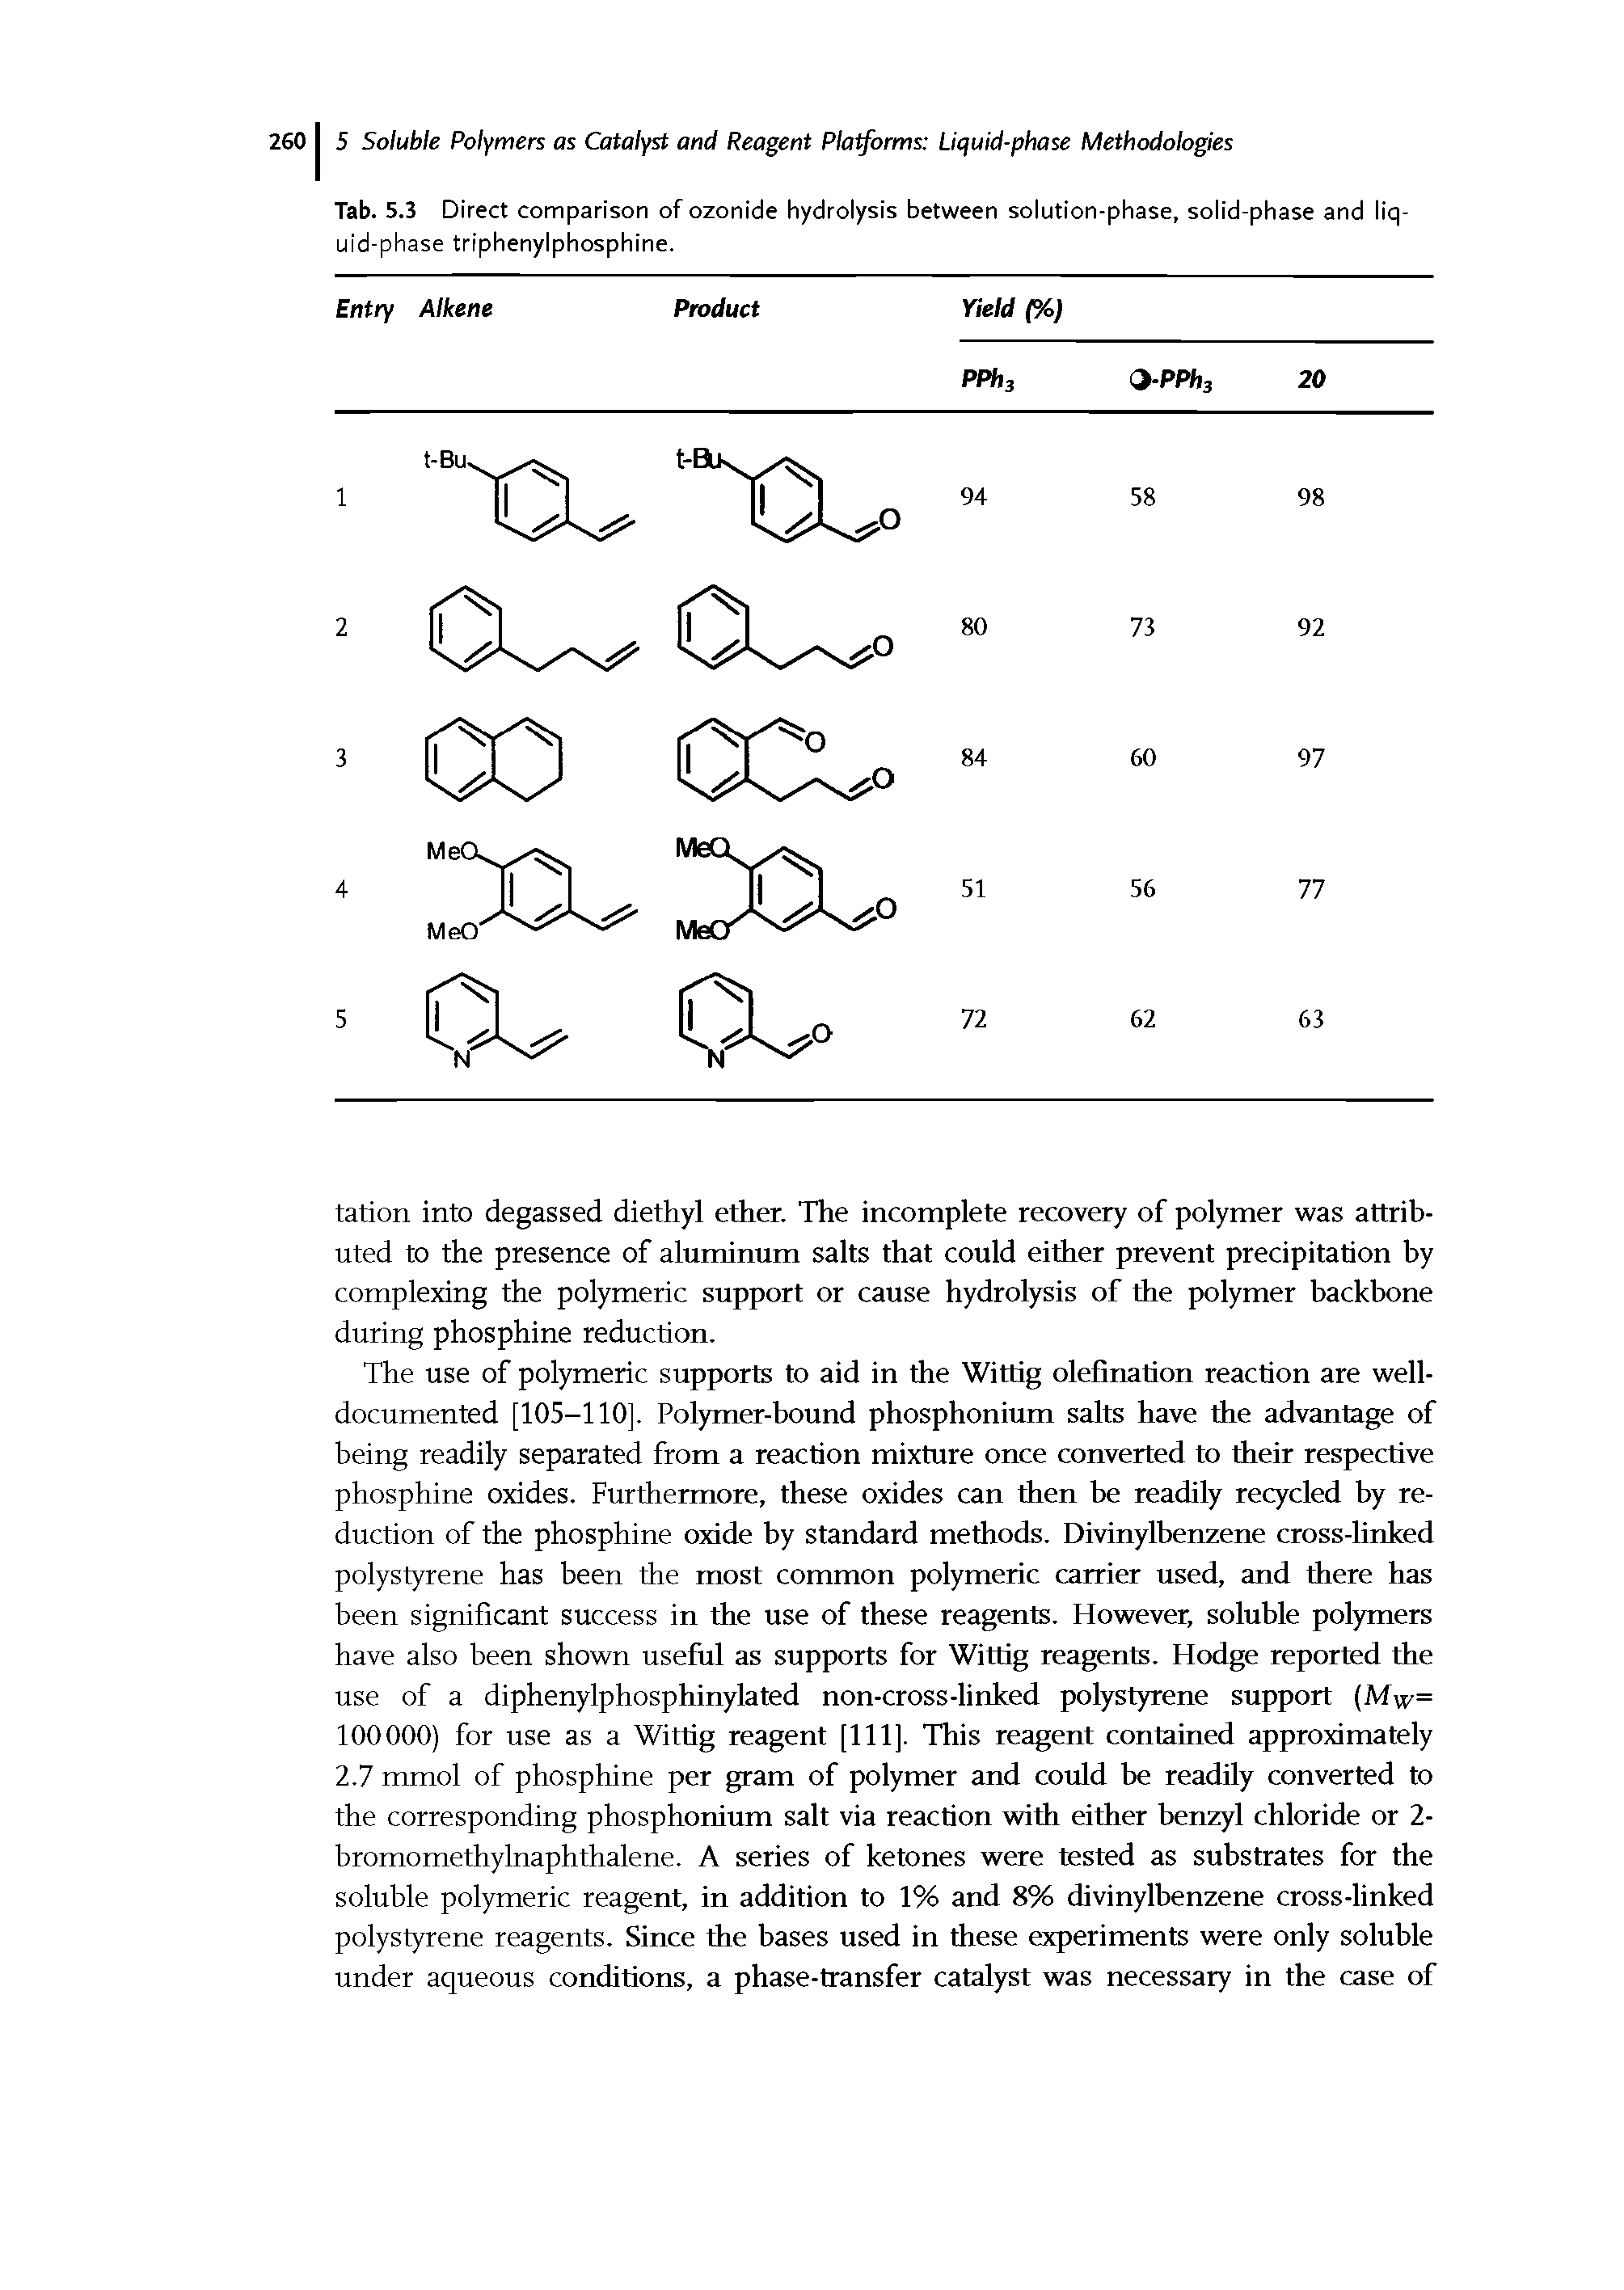 Tab. 5.3 Direct comparison of ozonide hydrolysis between solution-phase, solid-phase and liquid-phase triphenylphosphine.